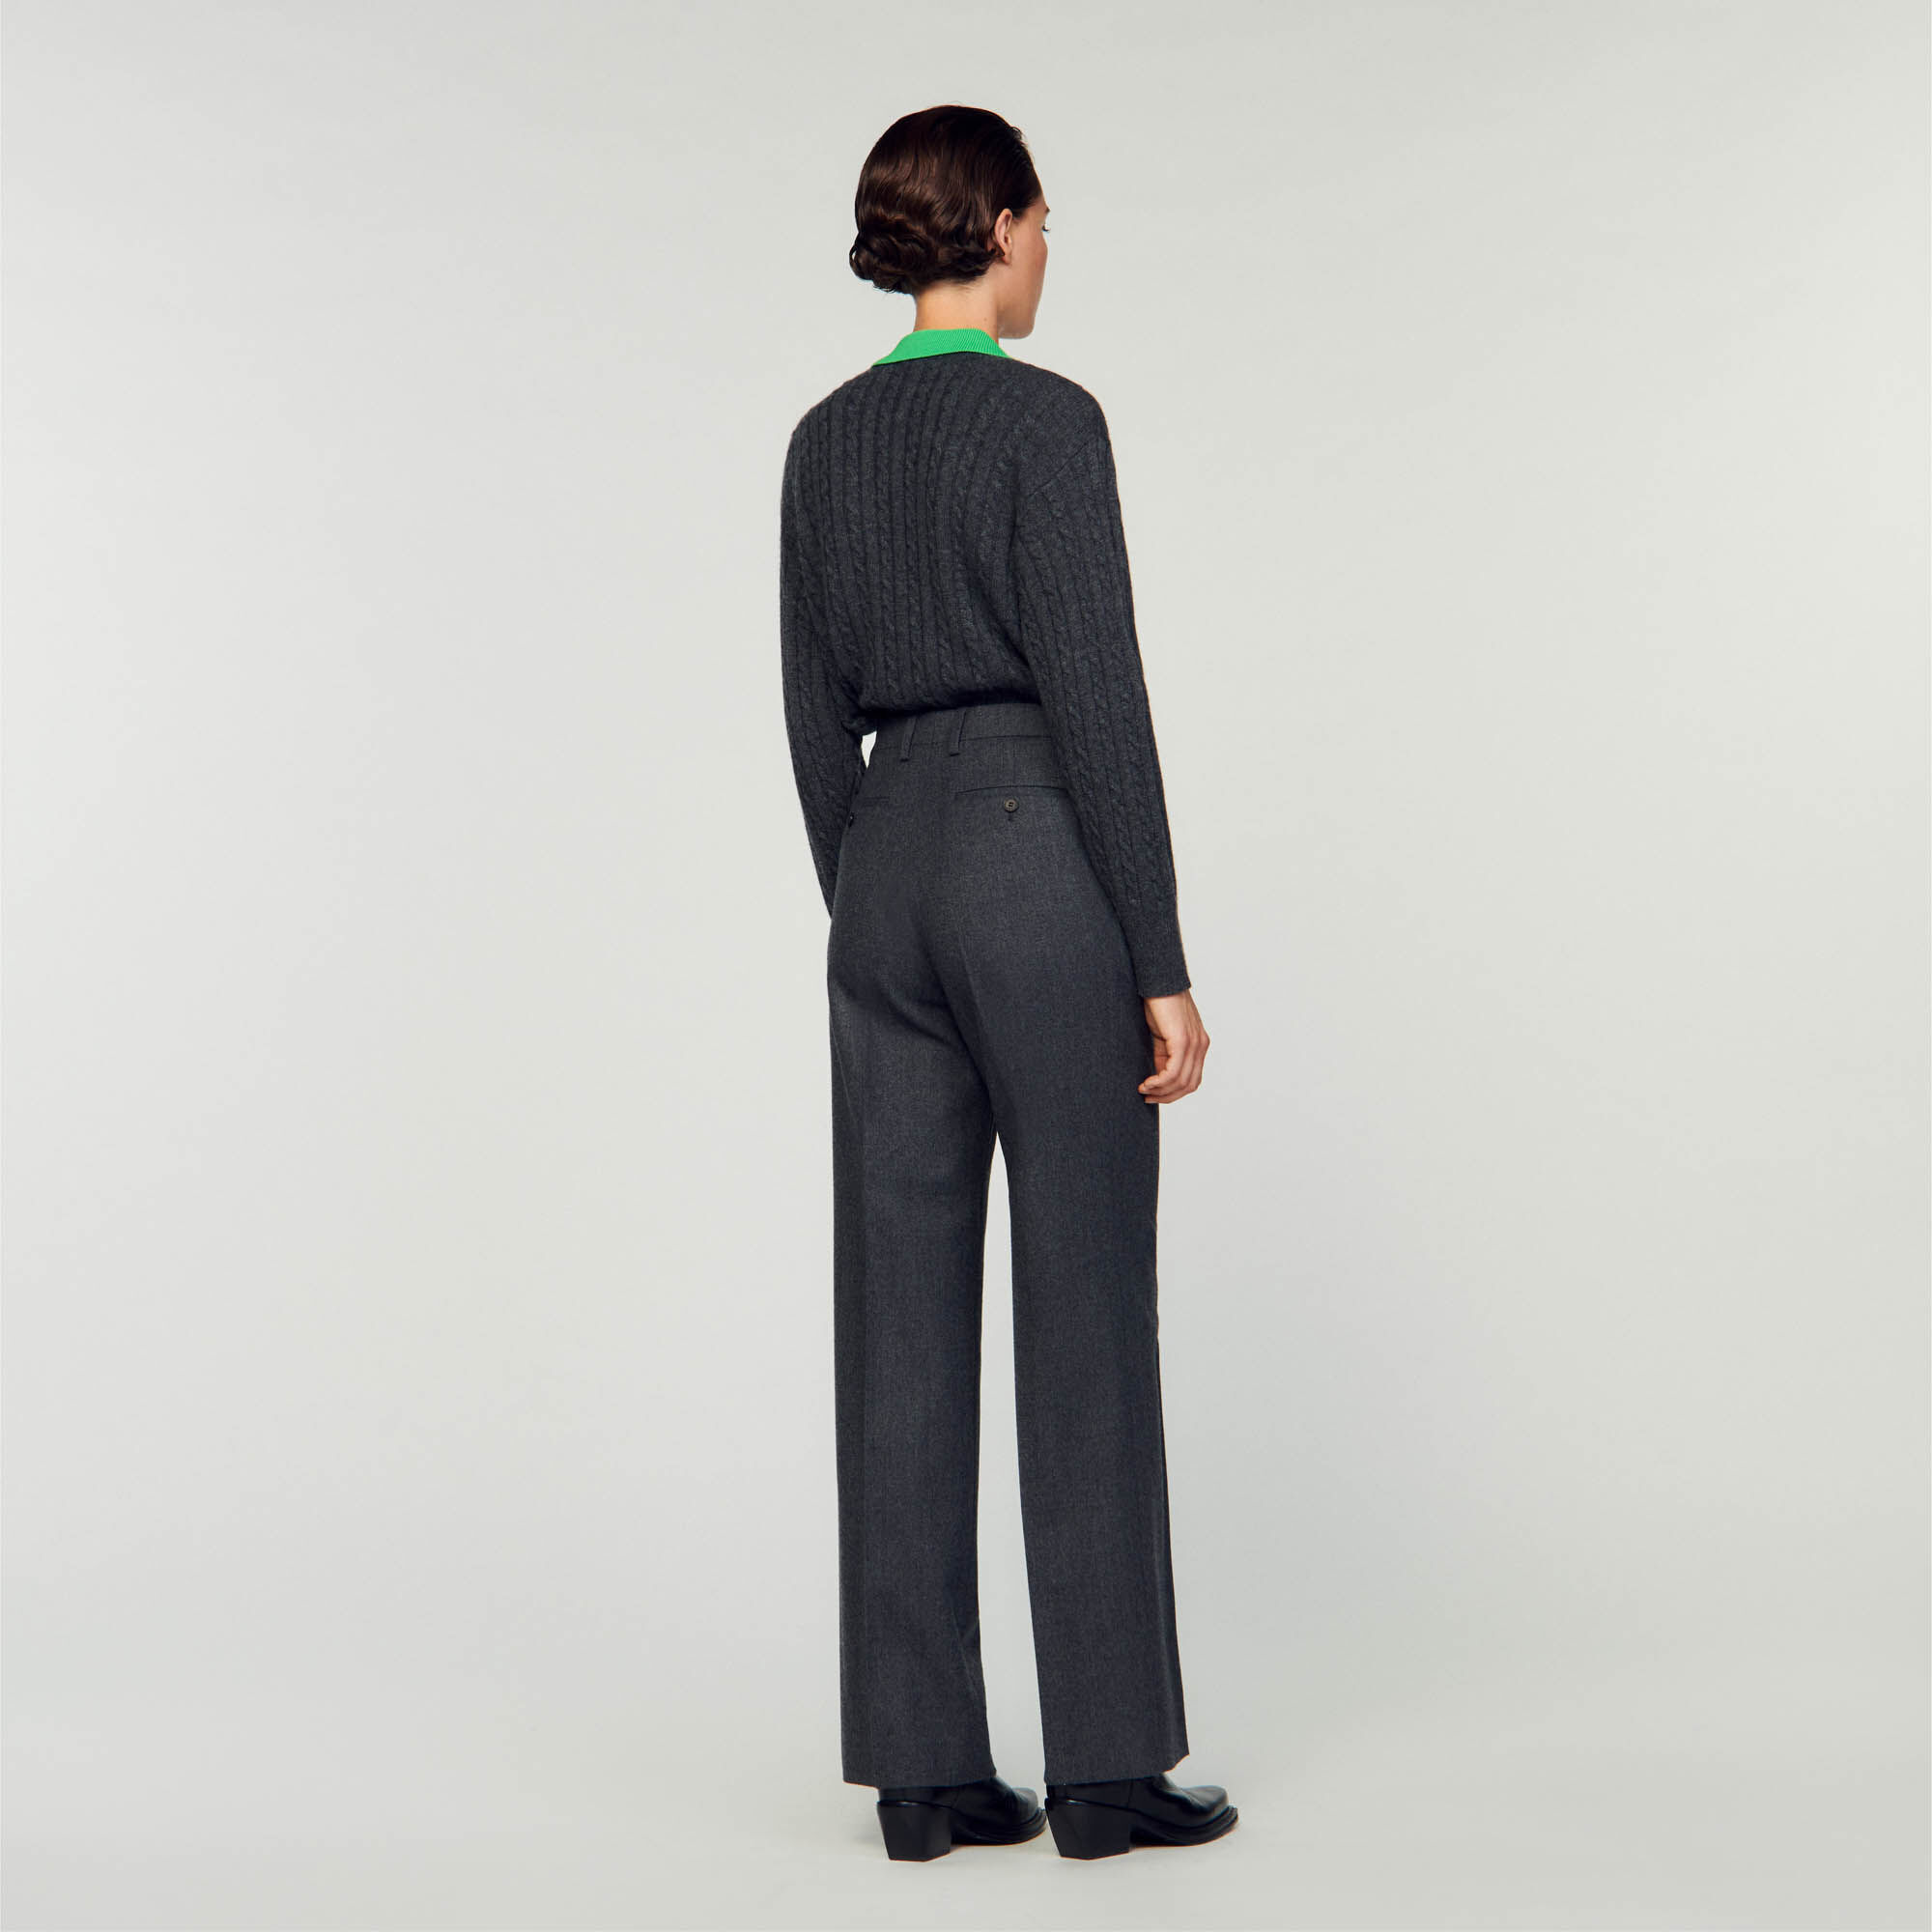 Wearing Wide Leg Trousers When You're Petite - Welcome Objects